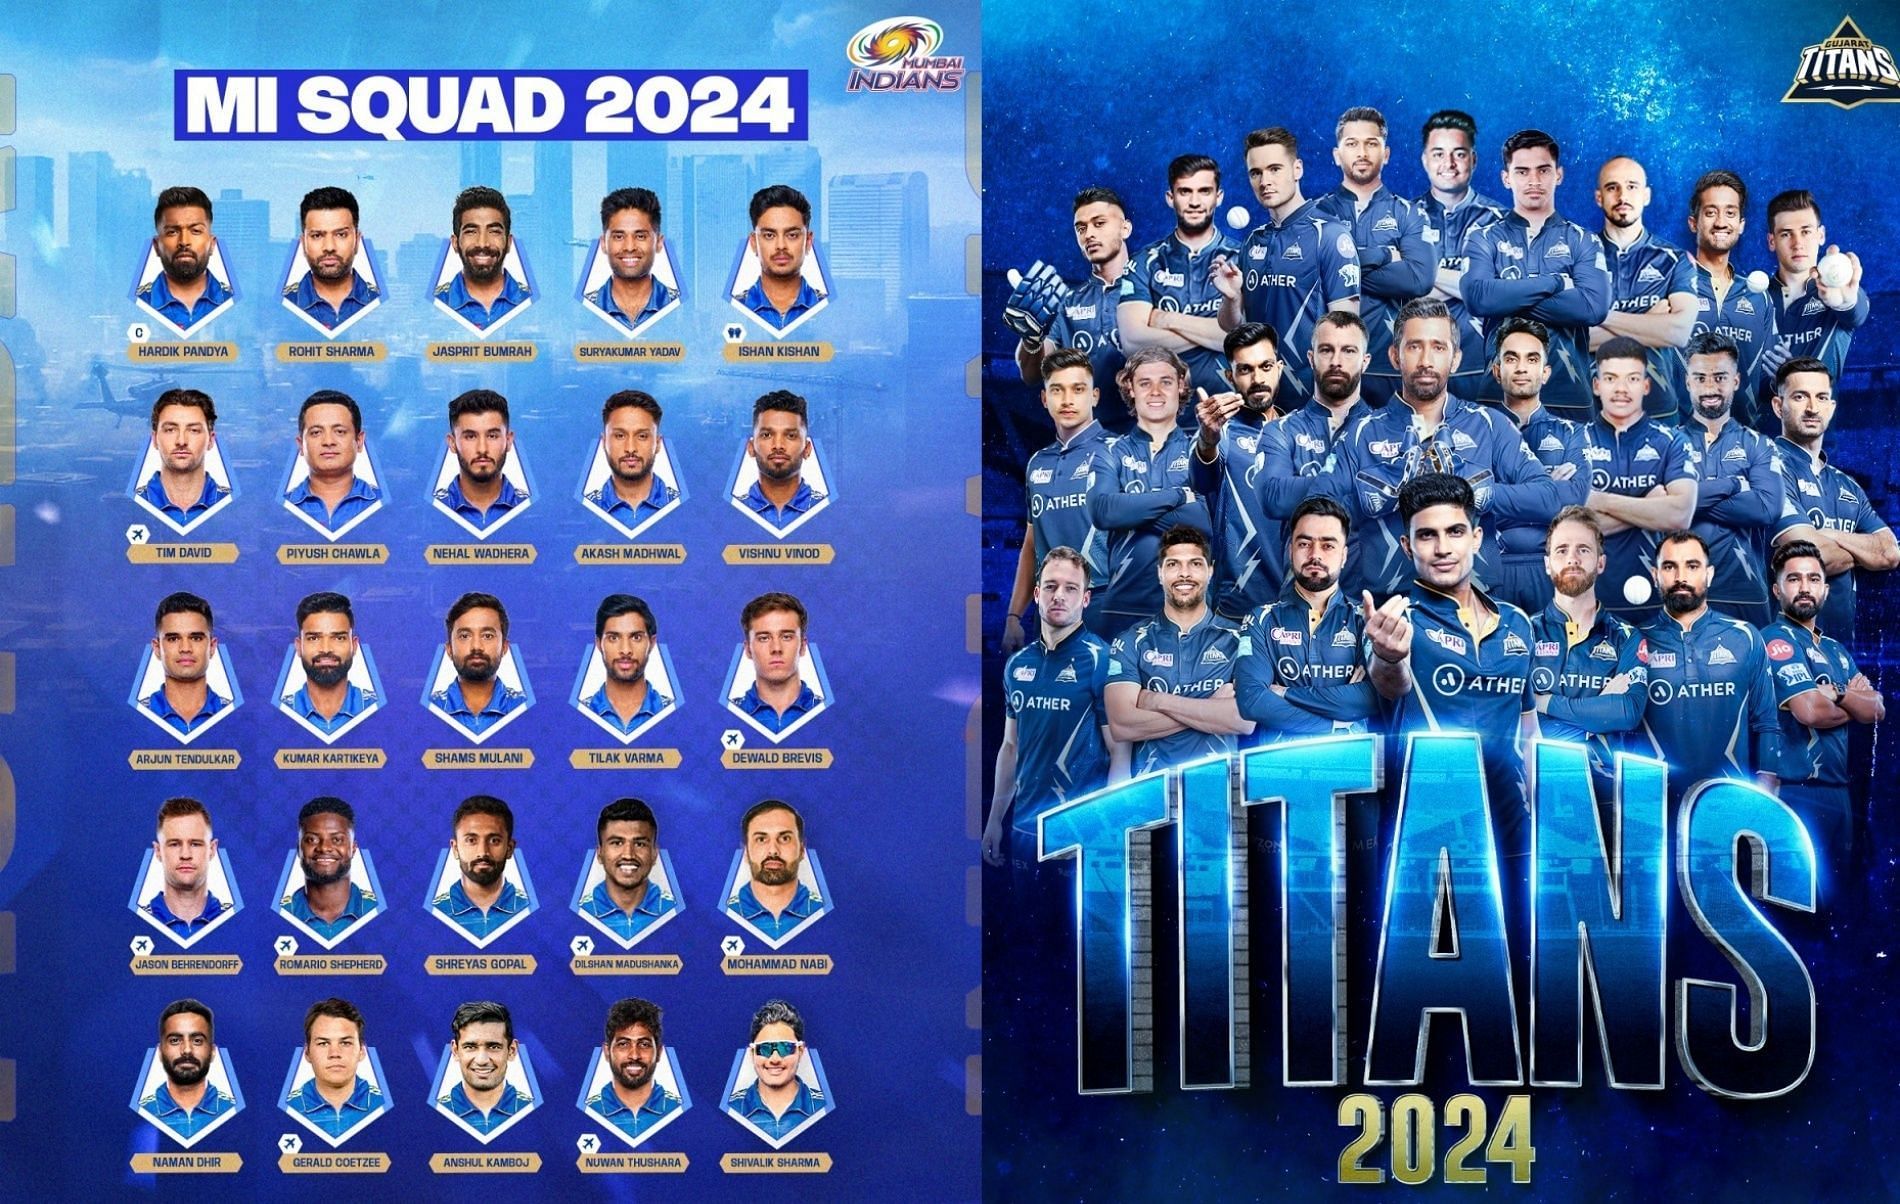 GT or MI which team has the better IPL 2024 squad?